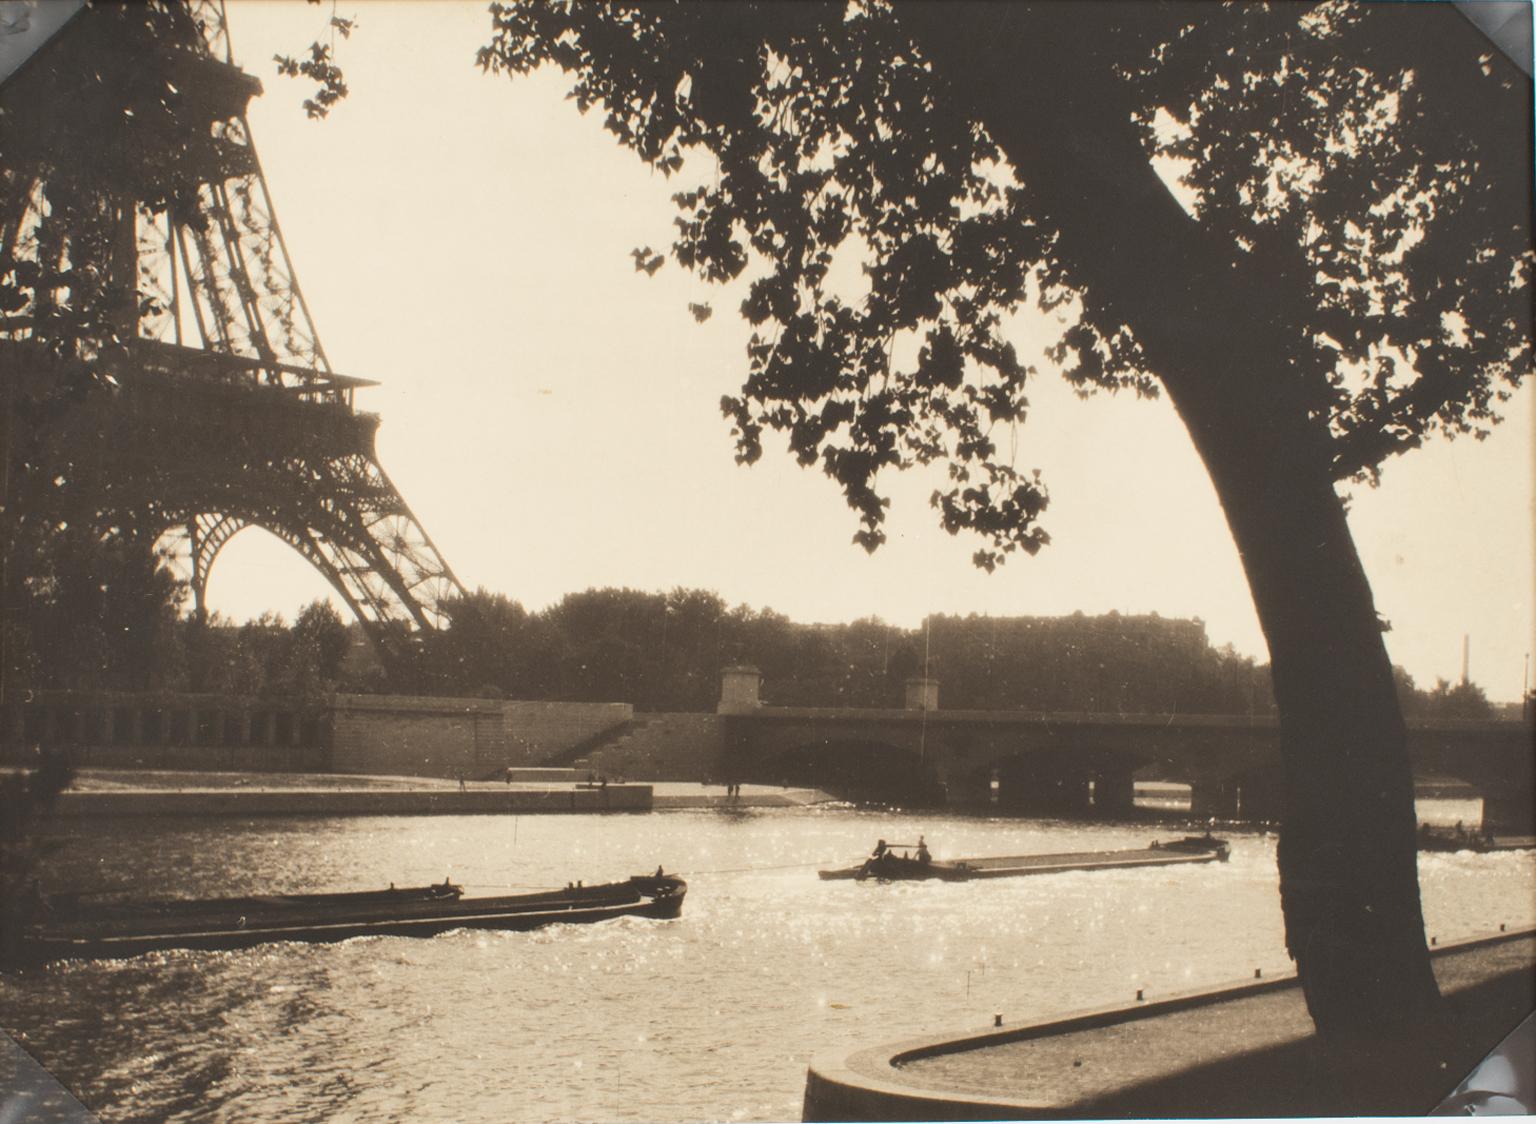 Unknown Landscape Photograph - The River Seine and the Eiffel Towel, Paris, Silver Gelatin B and W Photography